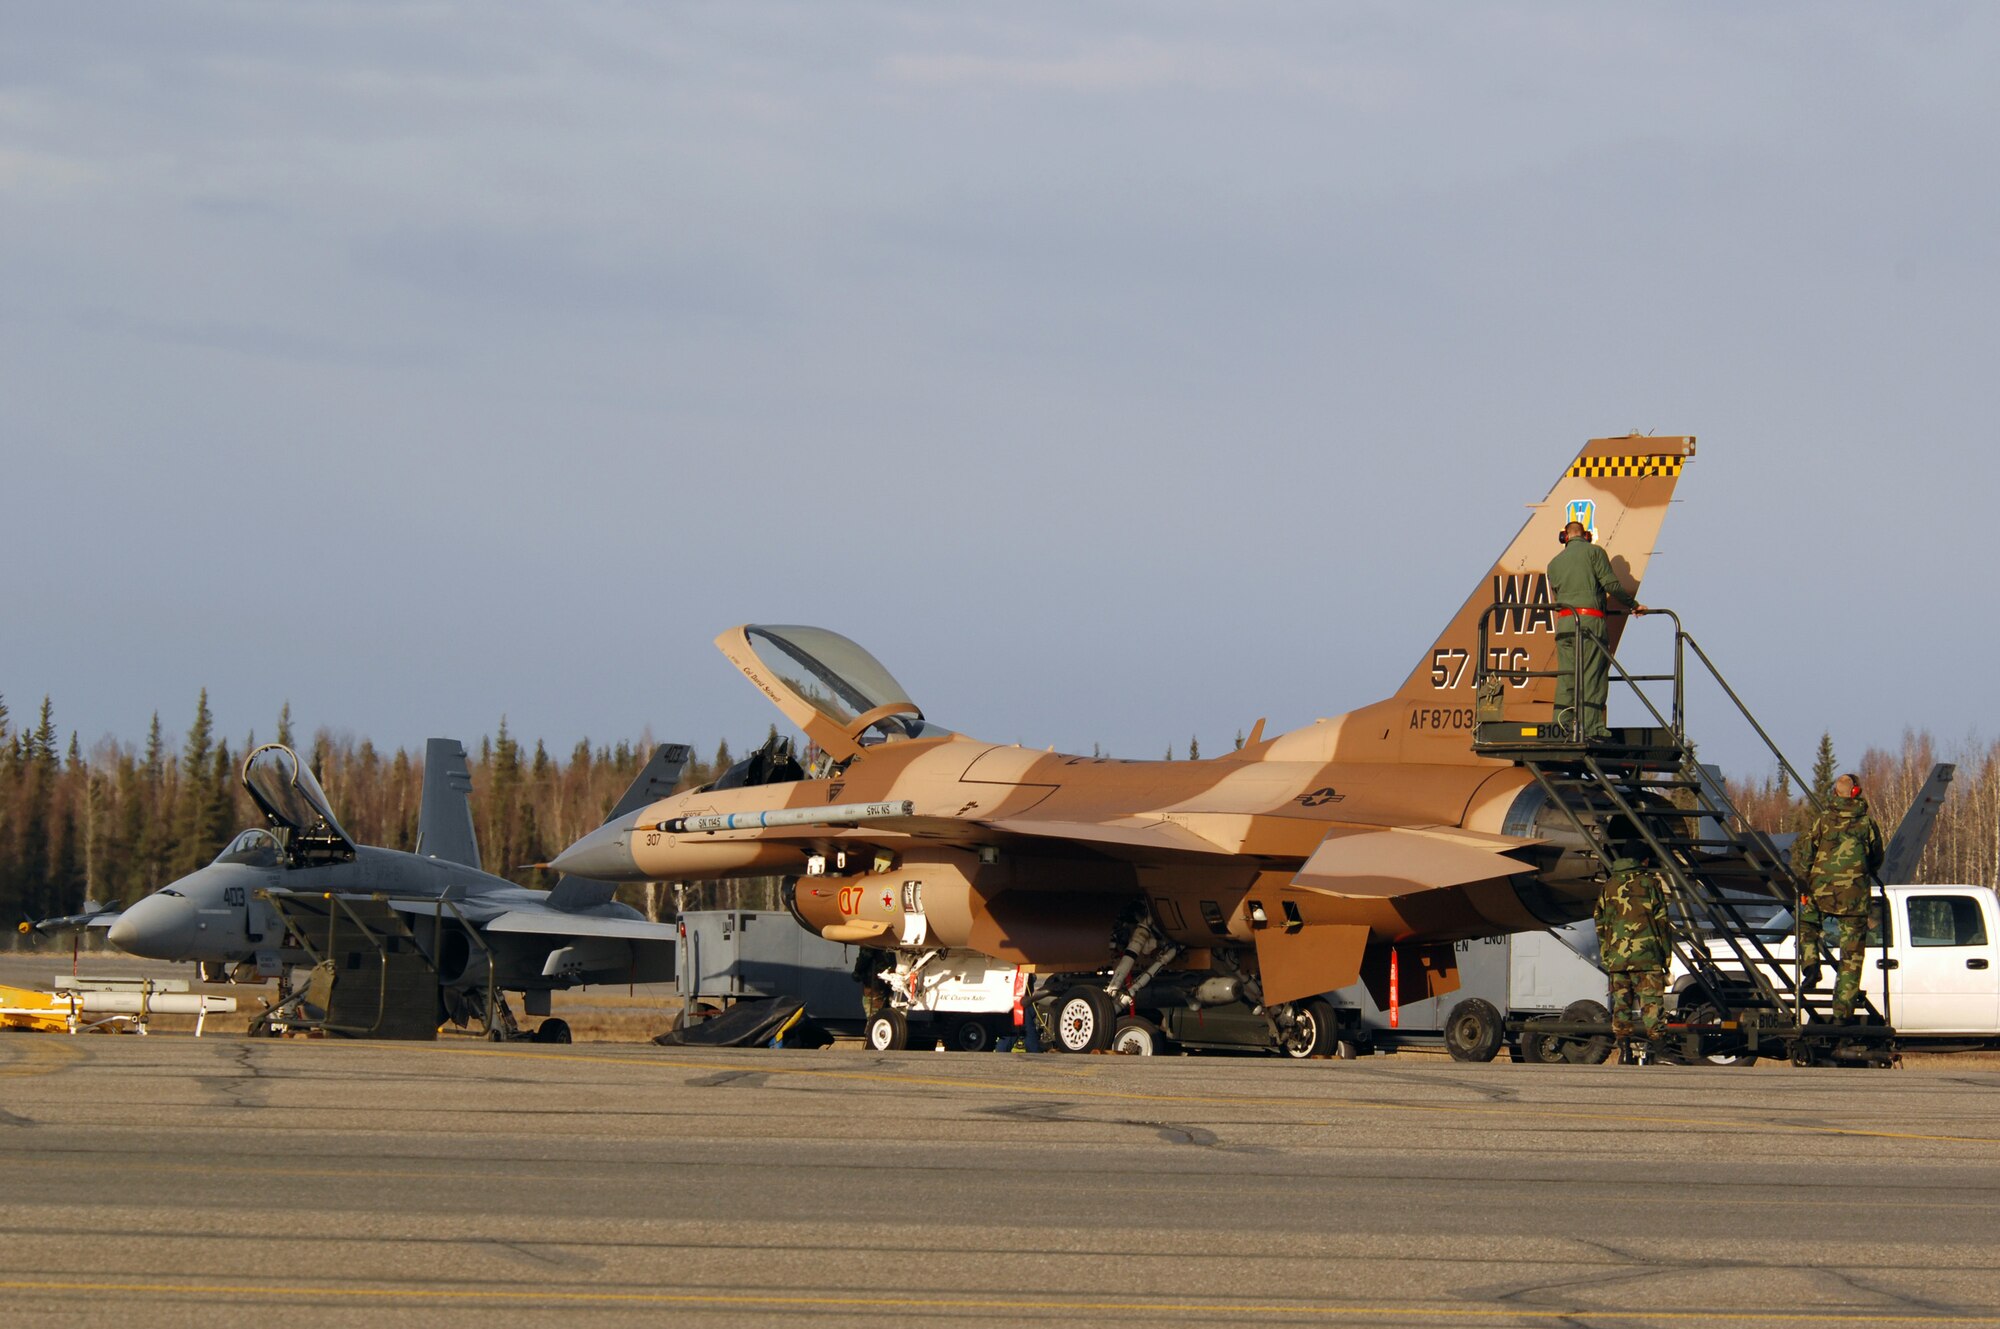 EIELSON AIR FORCE BASE, Alaska -- Maintainers from the 64th Aggressor Squadron, Nellis Air Force Base, Nevada, prep an F-16 prior to a mission during Red Flag-Alaska 07-1 here on April 10. Red Flag-Alaska is a Pacific Air Forces-directed field training exercise for U.S. forces flown under simulated air combat conditions. It is conducted on the Pacific Alaskan Range Complex with air operations flown out of Eielson and Elmendorf Air Force Bases. 
(U.S. Air Force Photo by Staff Sgt Joshua Strang) 